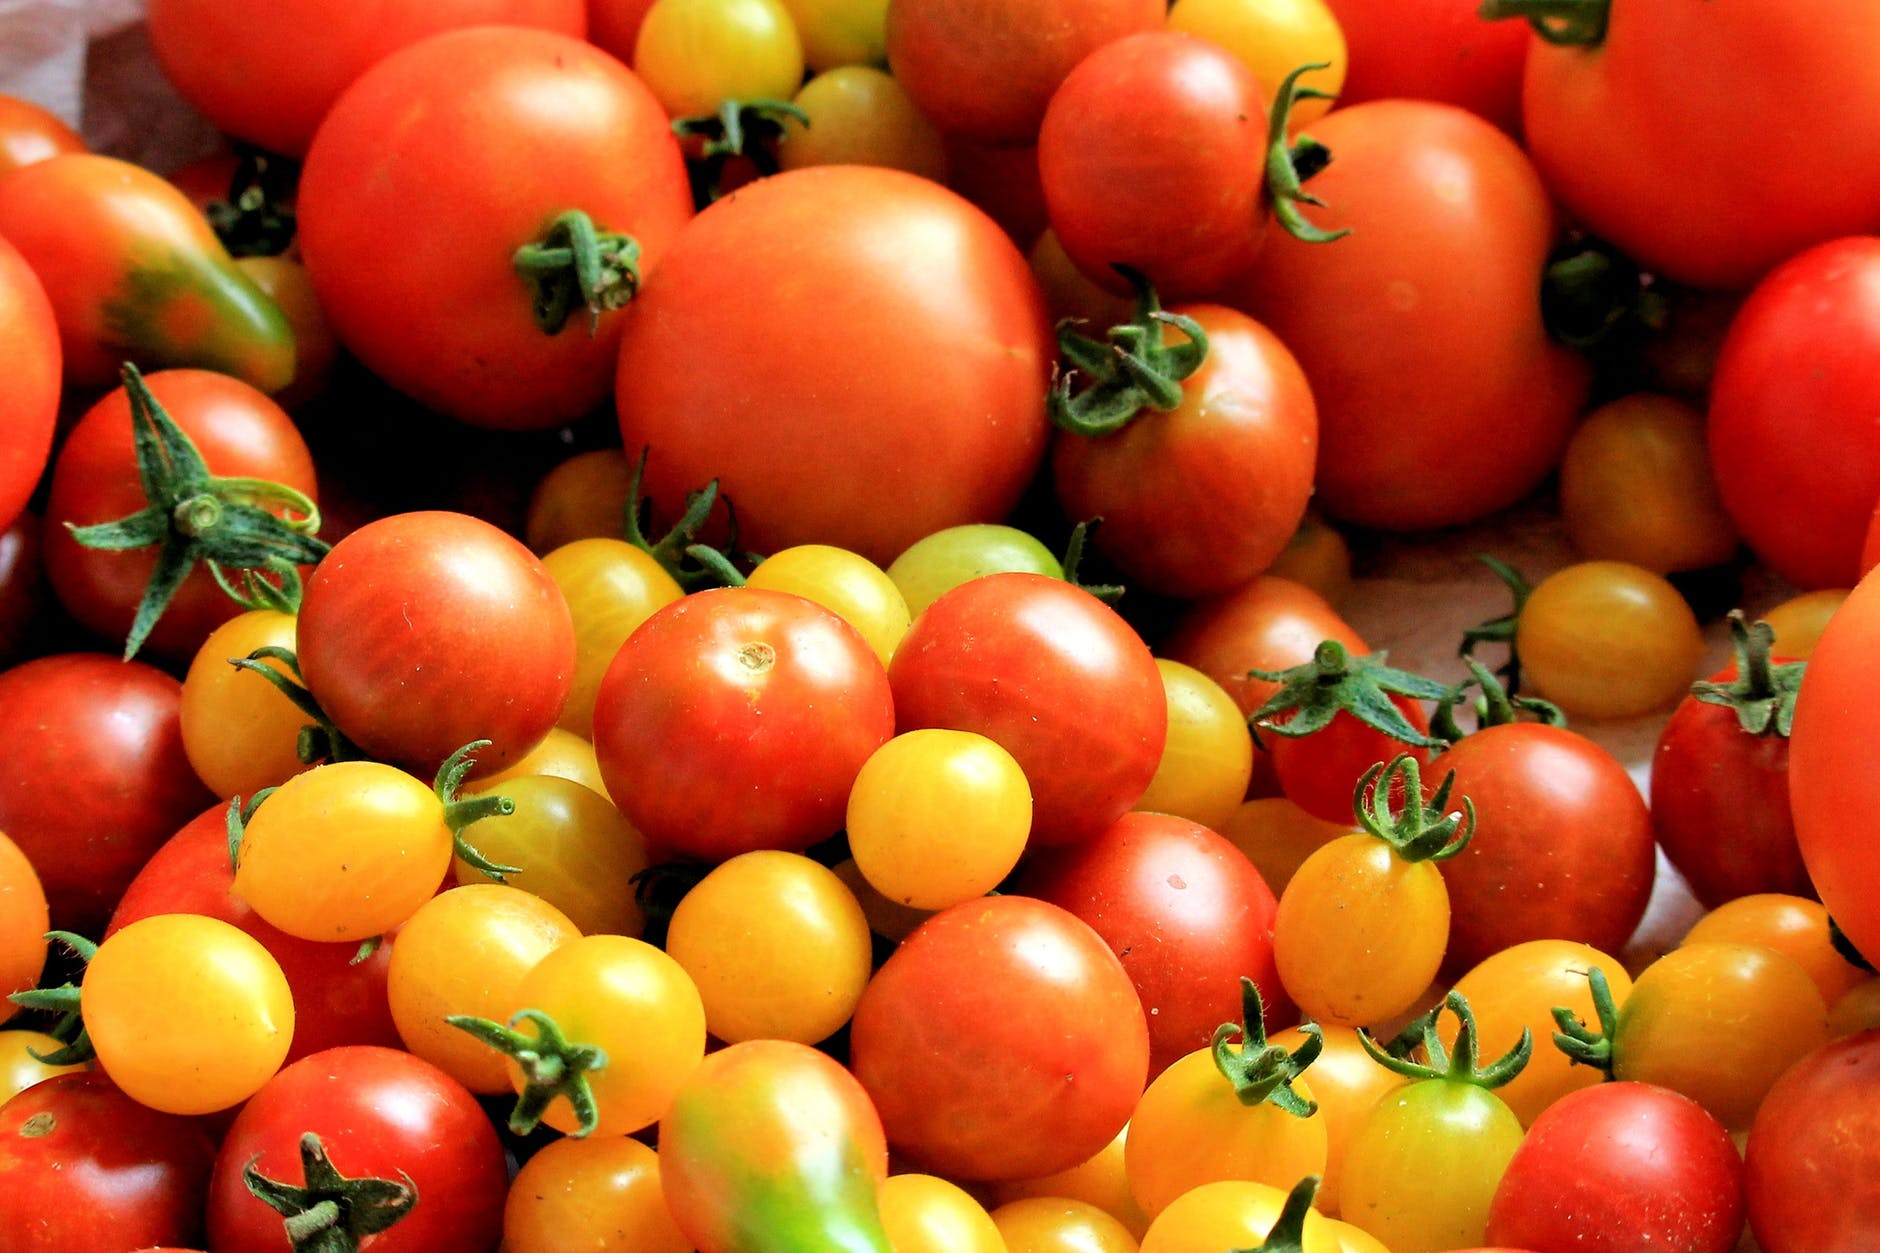 Featured image for “N.C. Tomato Growers Association Offering Scholarship”